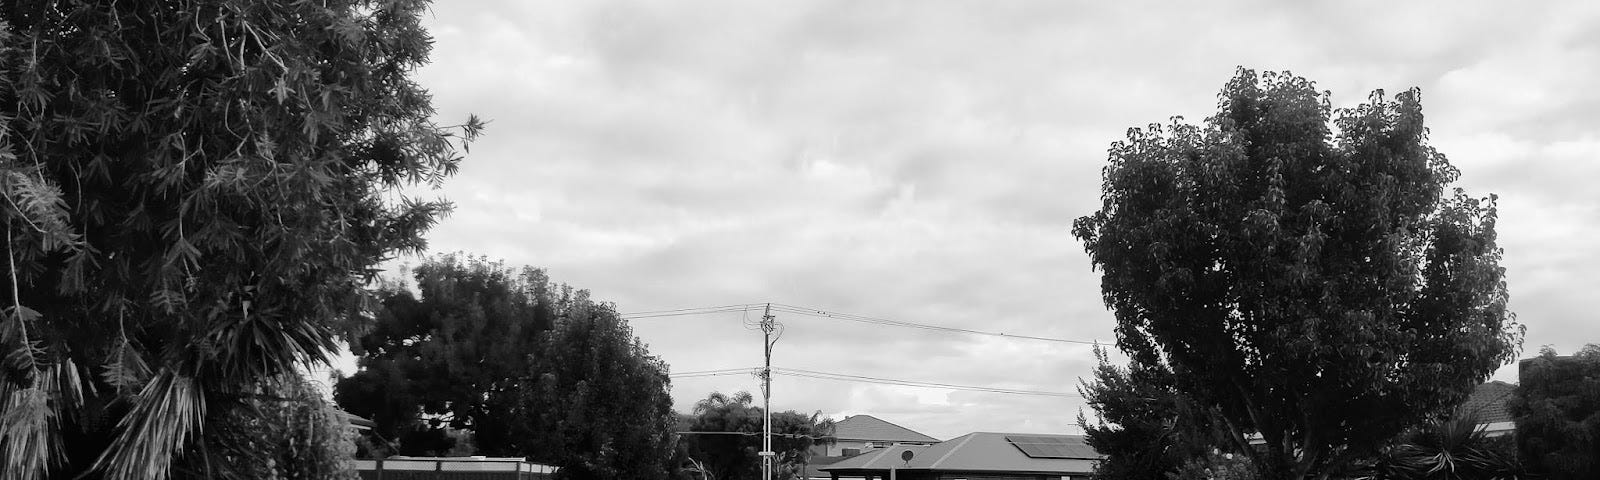 Black and white photo of a suburban street with houses and trees on a day.